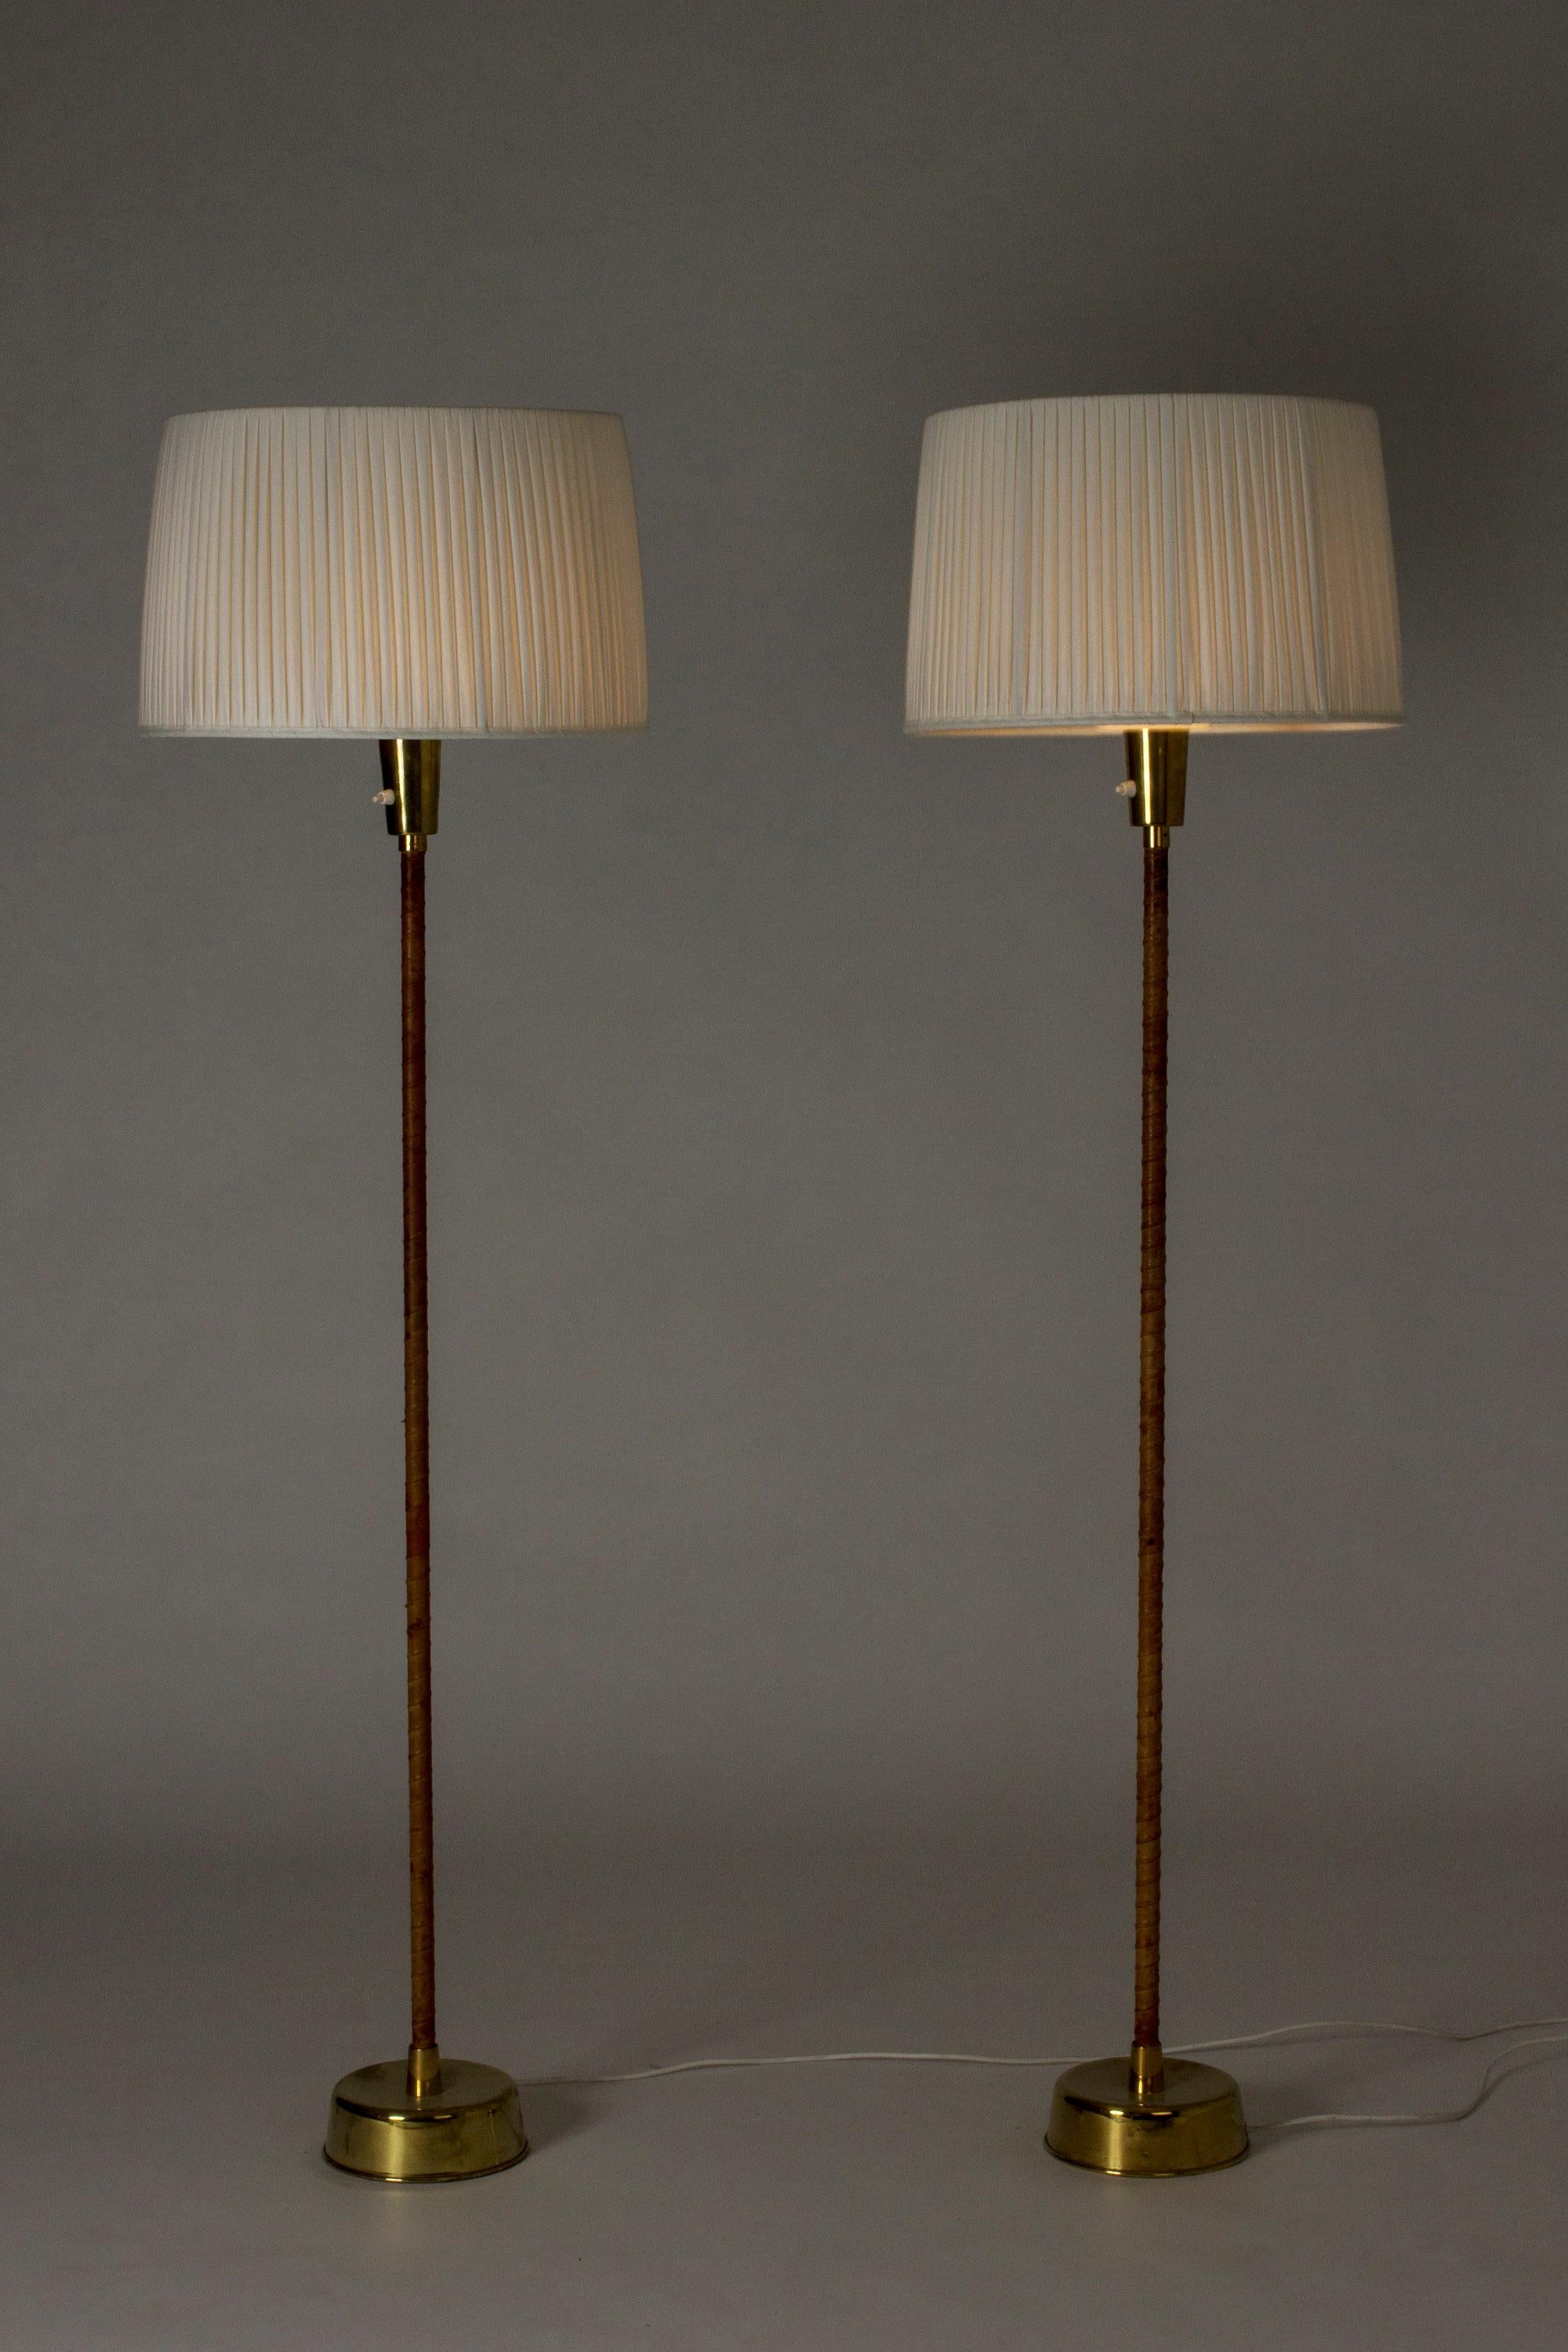 Scandinavian Modern Pair of Floor Lamps by Lisa Johansson-Pape for Orno For Sale